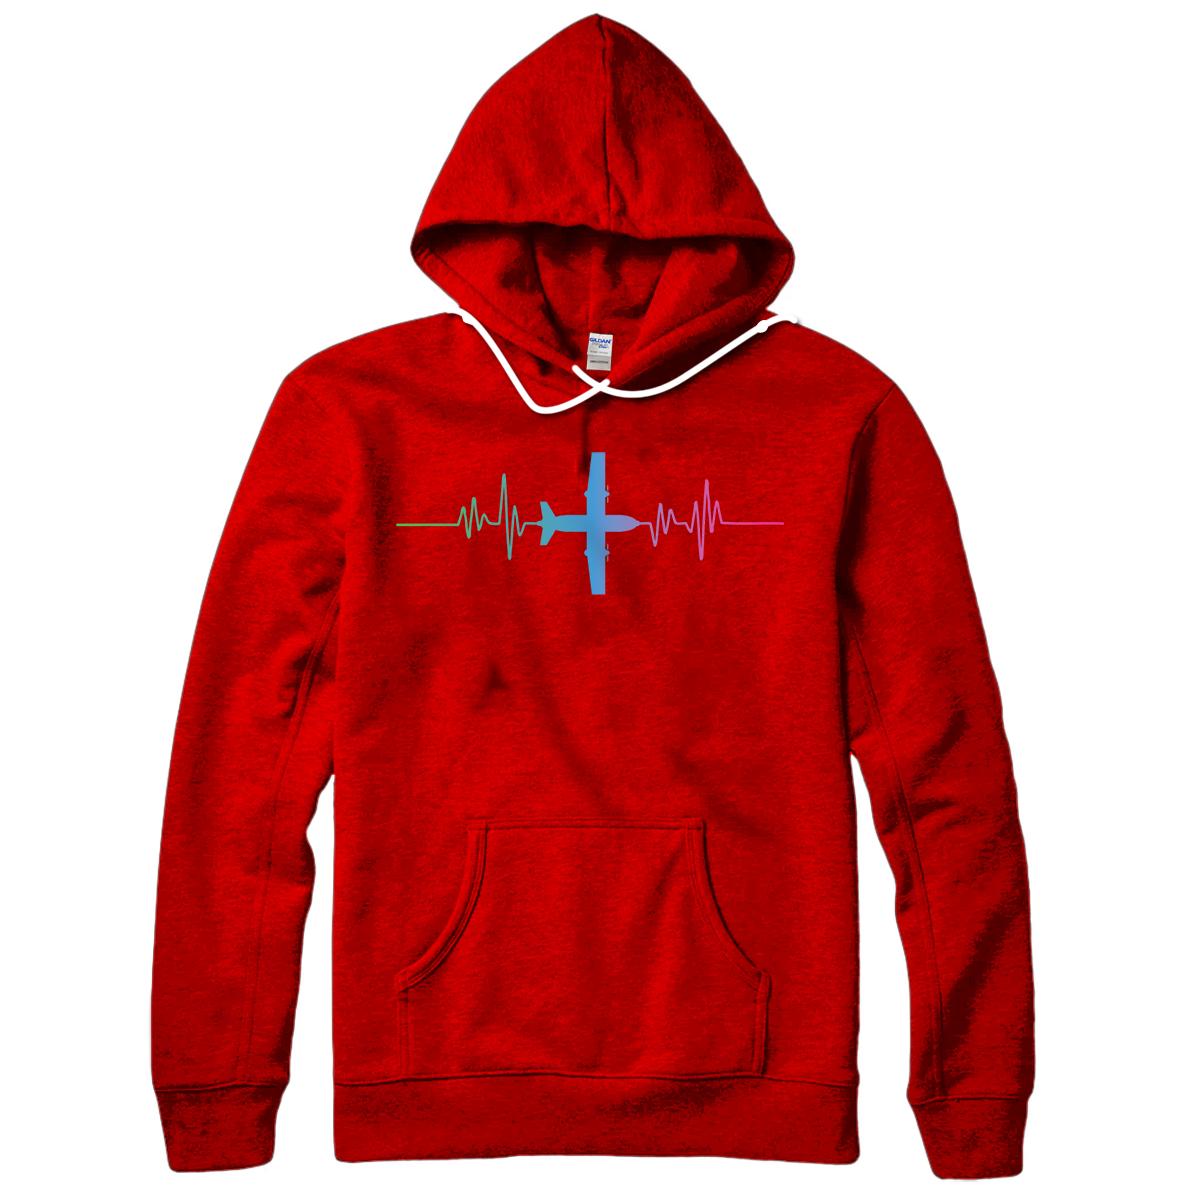 Pilot Hoodie, Thinking About Planes, Plane Gift, Kids & Adult Sizes, Pilot  Gift, Sublimated Design, Unisex Fit, Airplane Hoodie, Planes